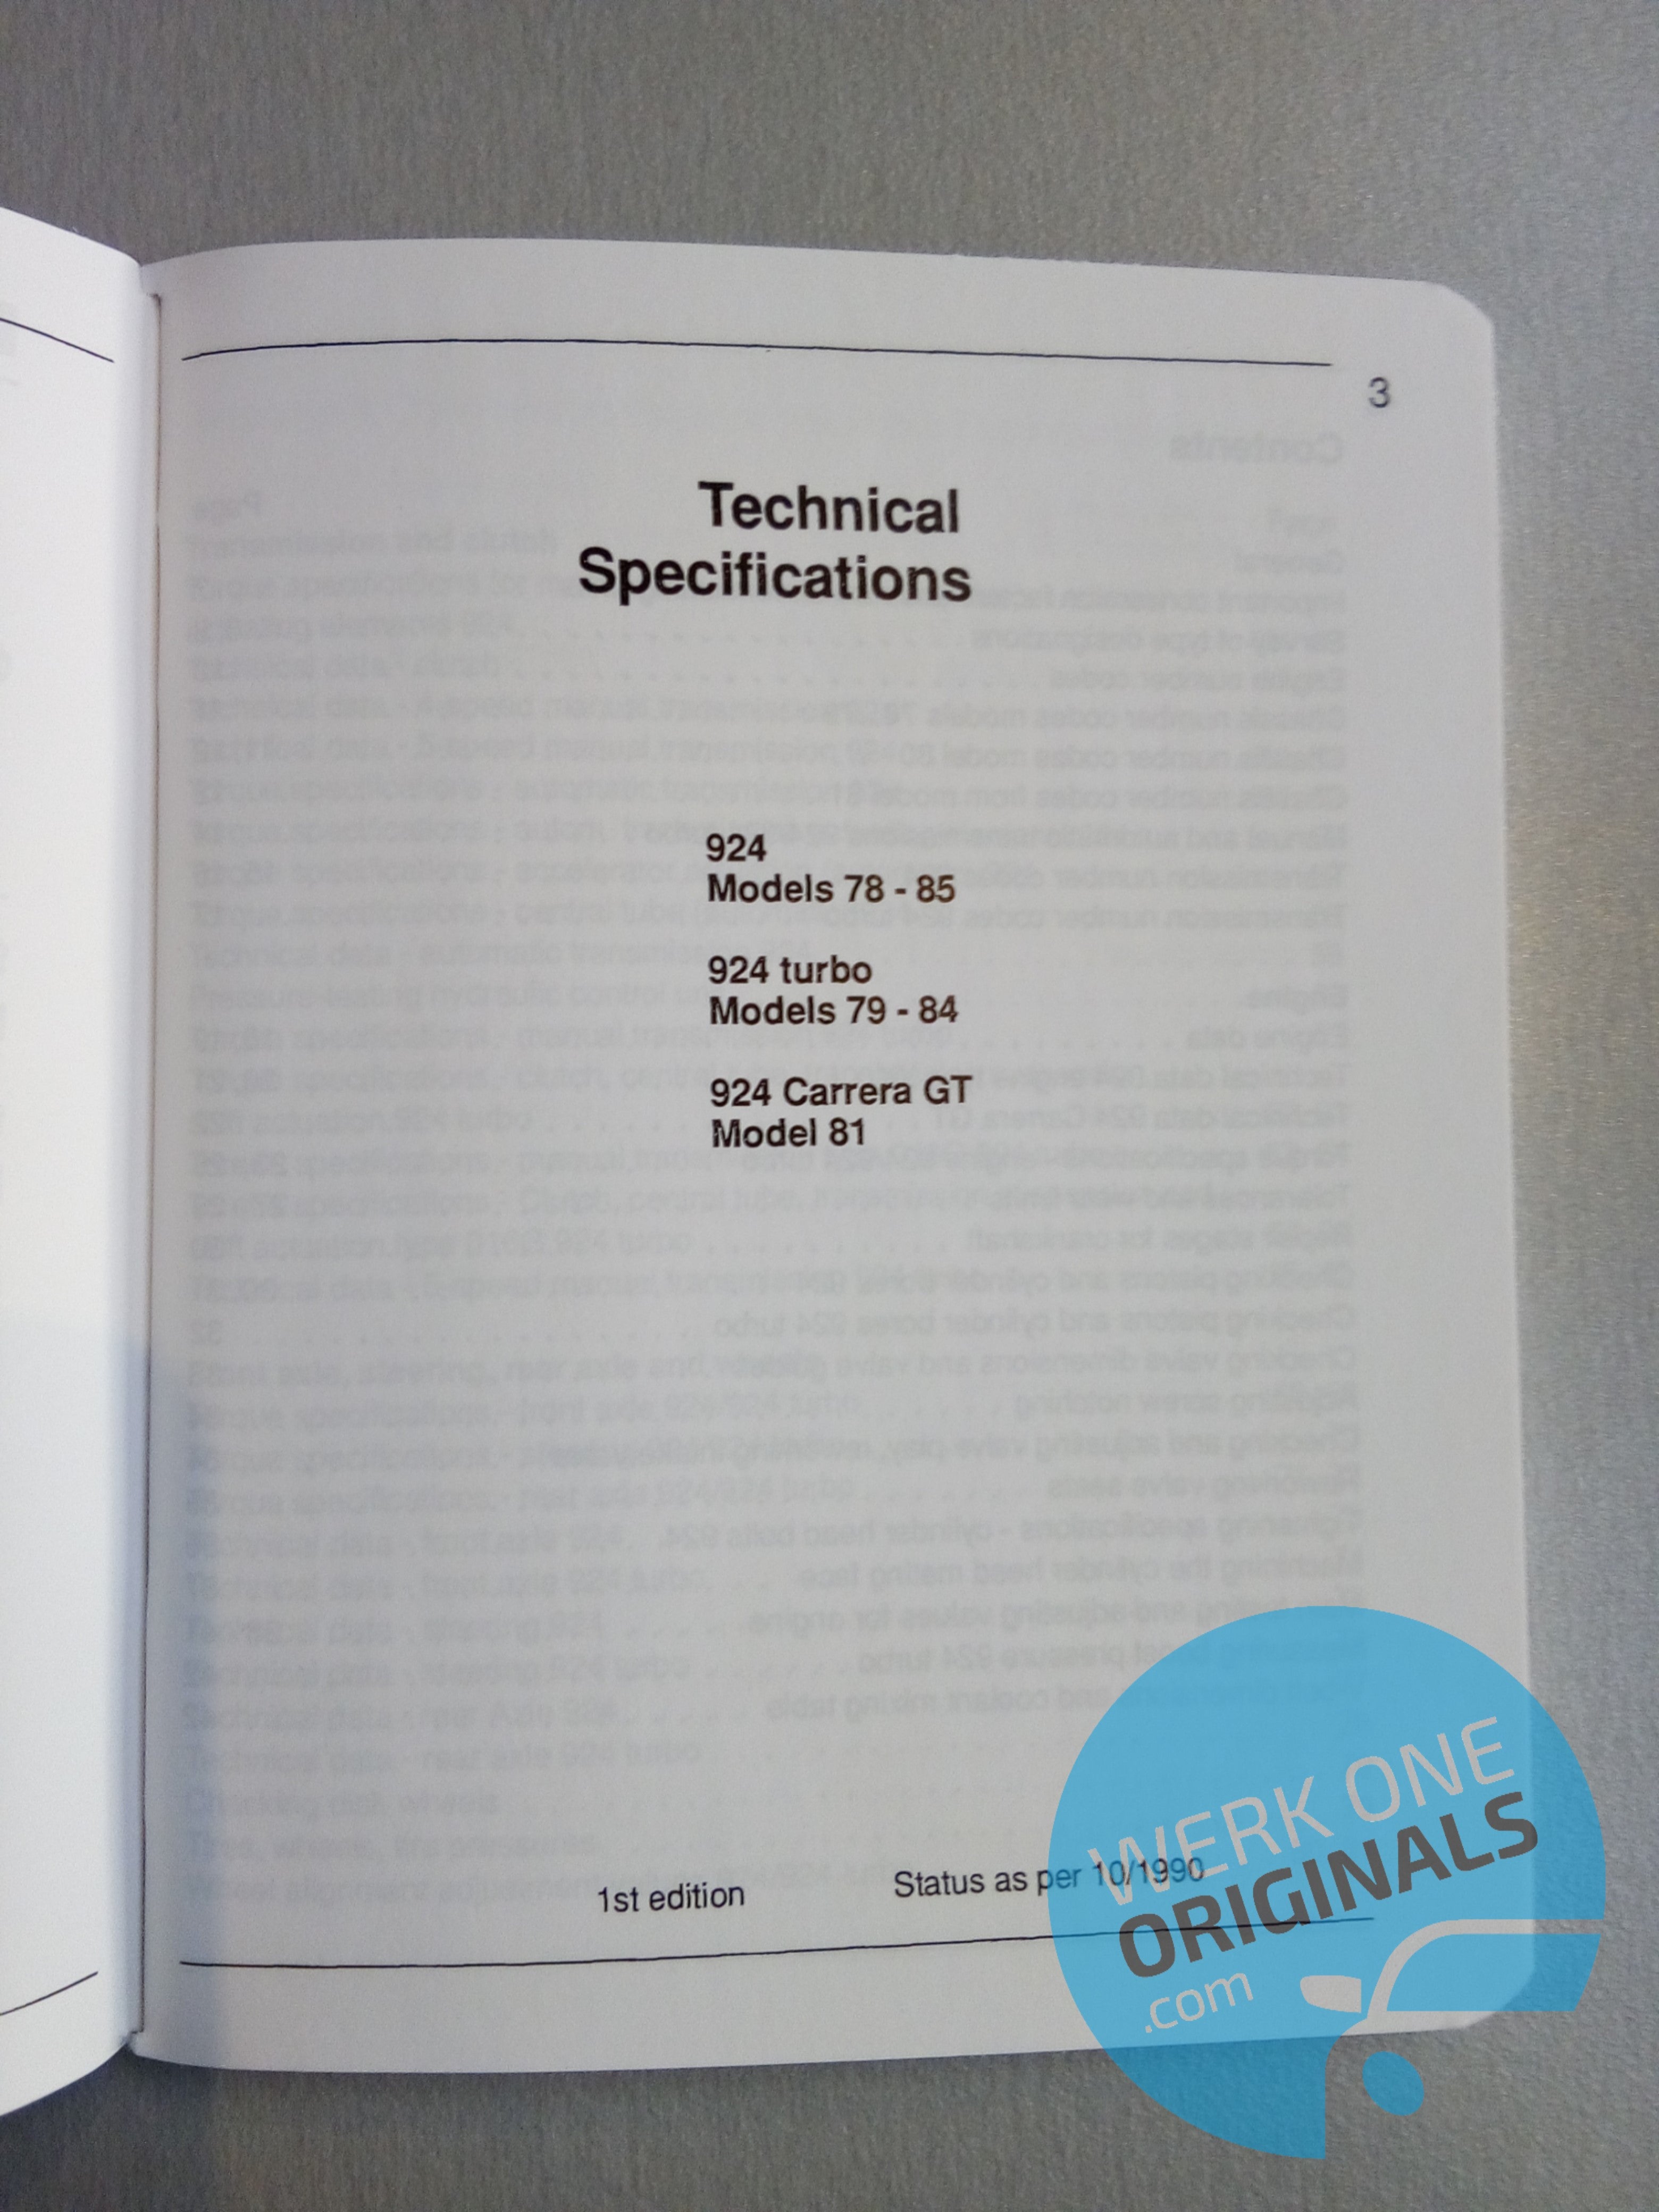 Porsche Technical Specification Manual for 924 Models (1978 - 1985)